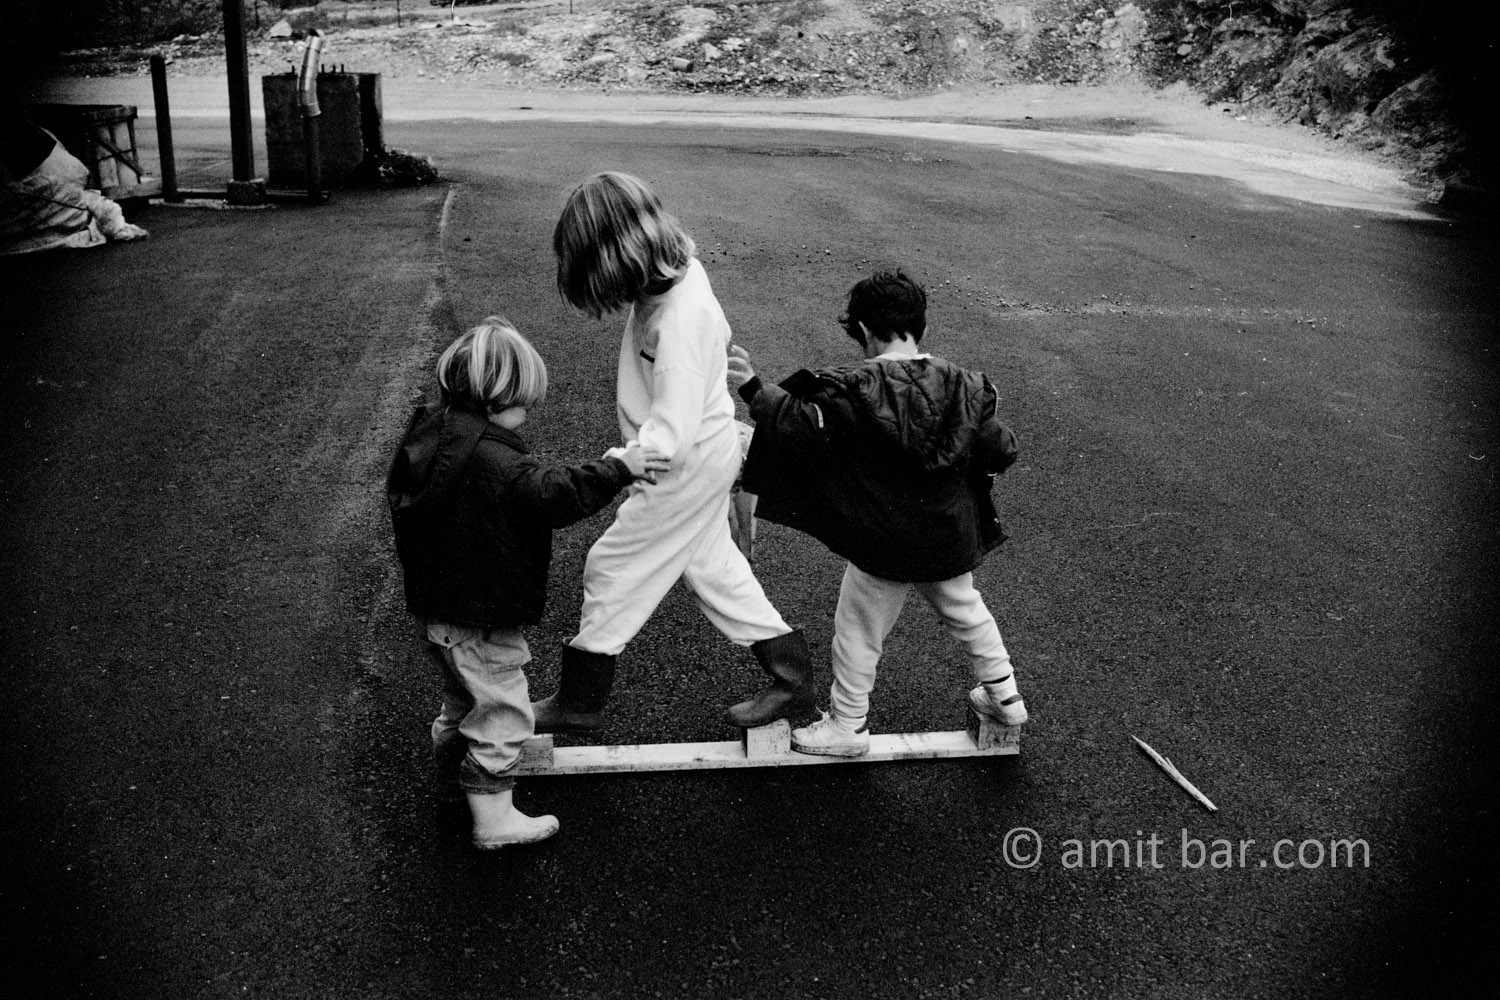 Balancing: Three children are searching a balance on a wooden plank